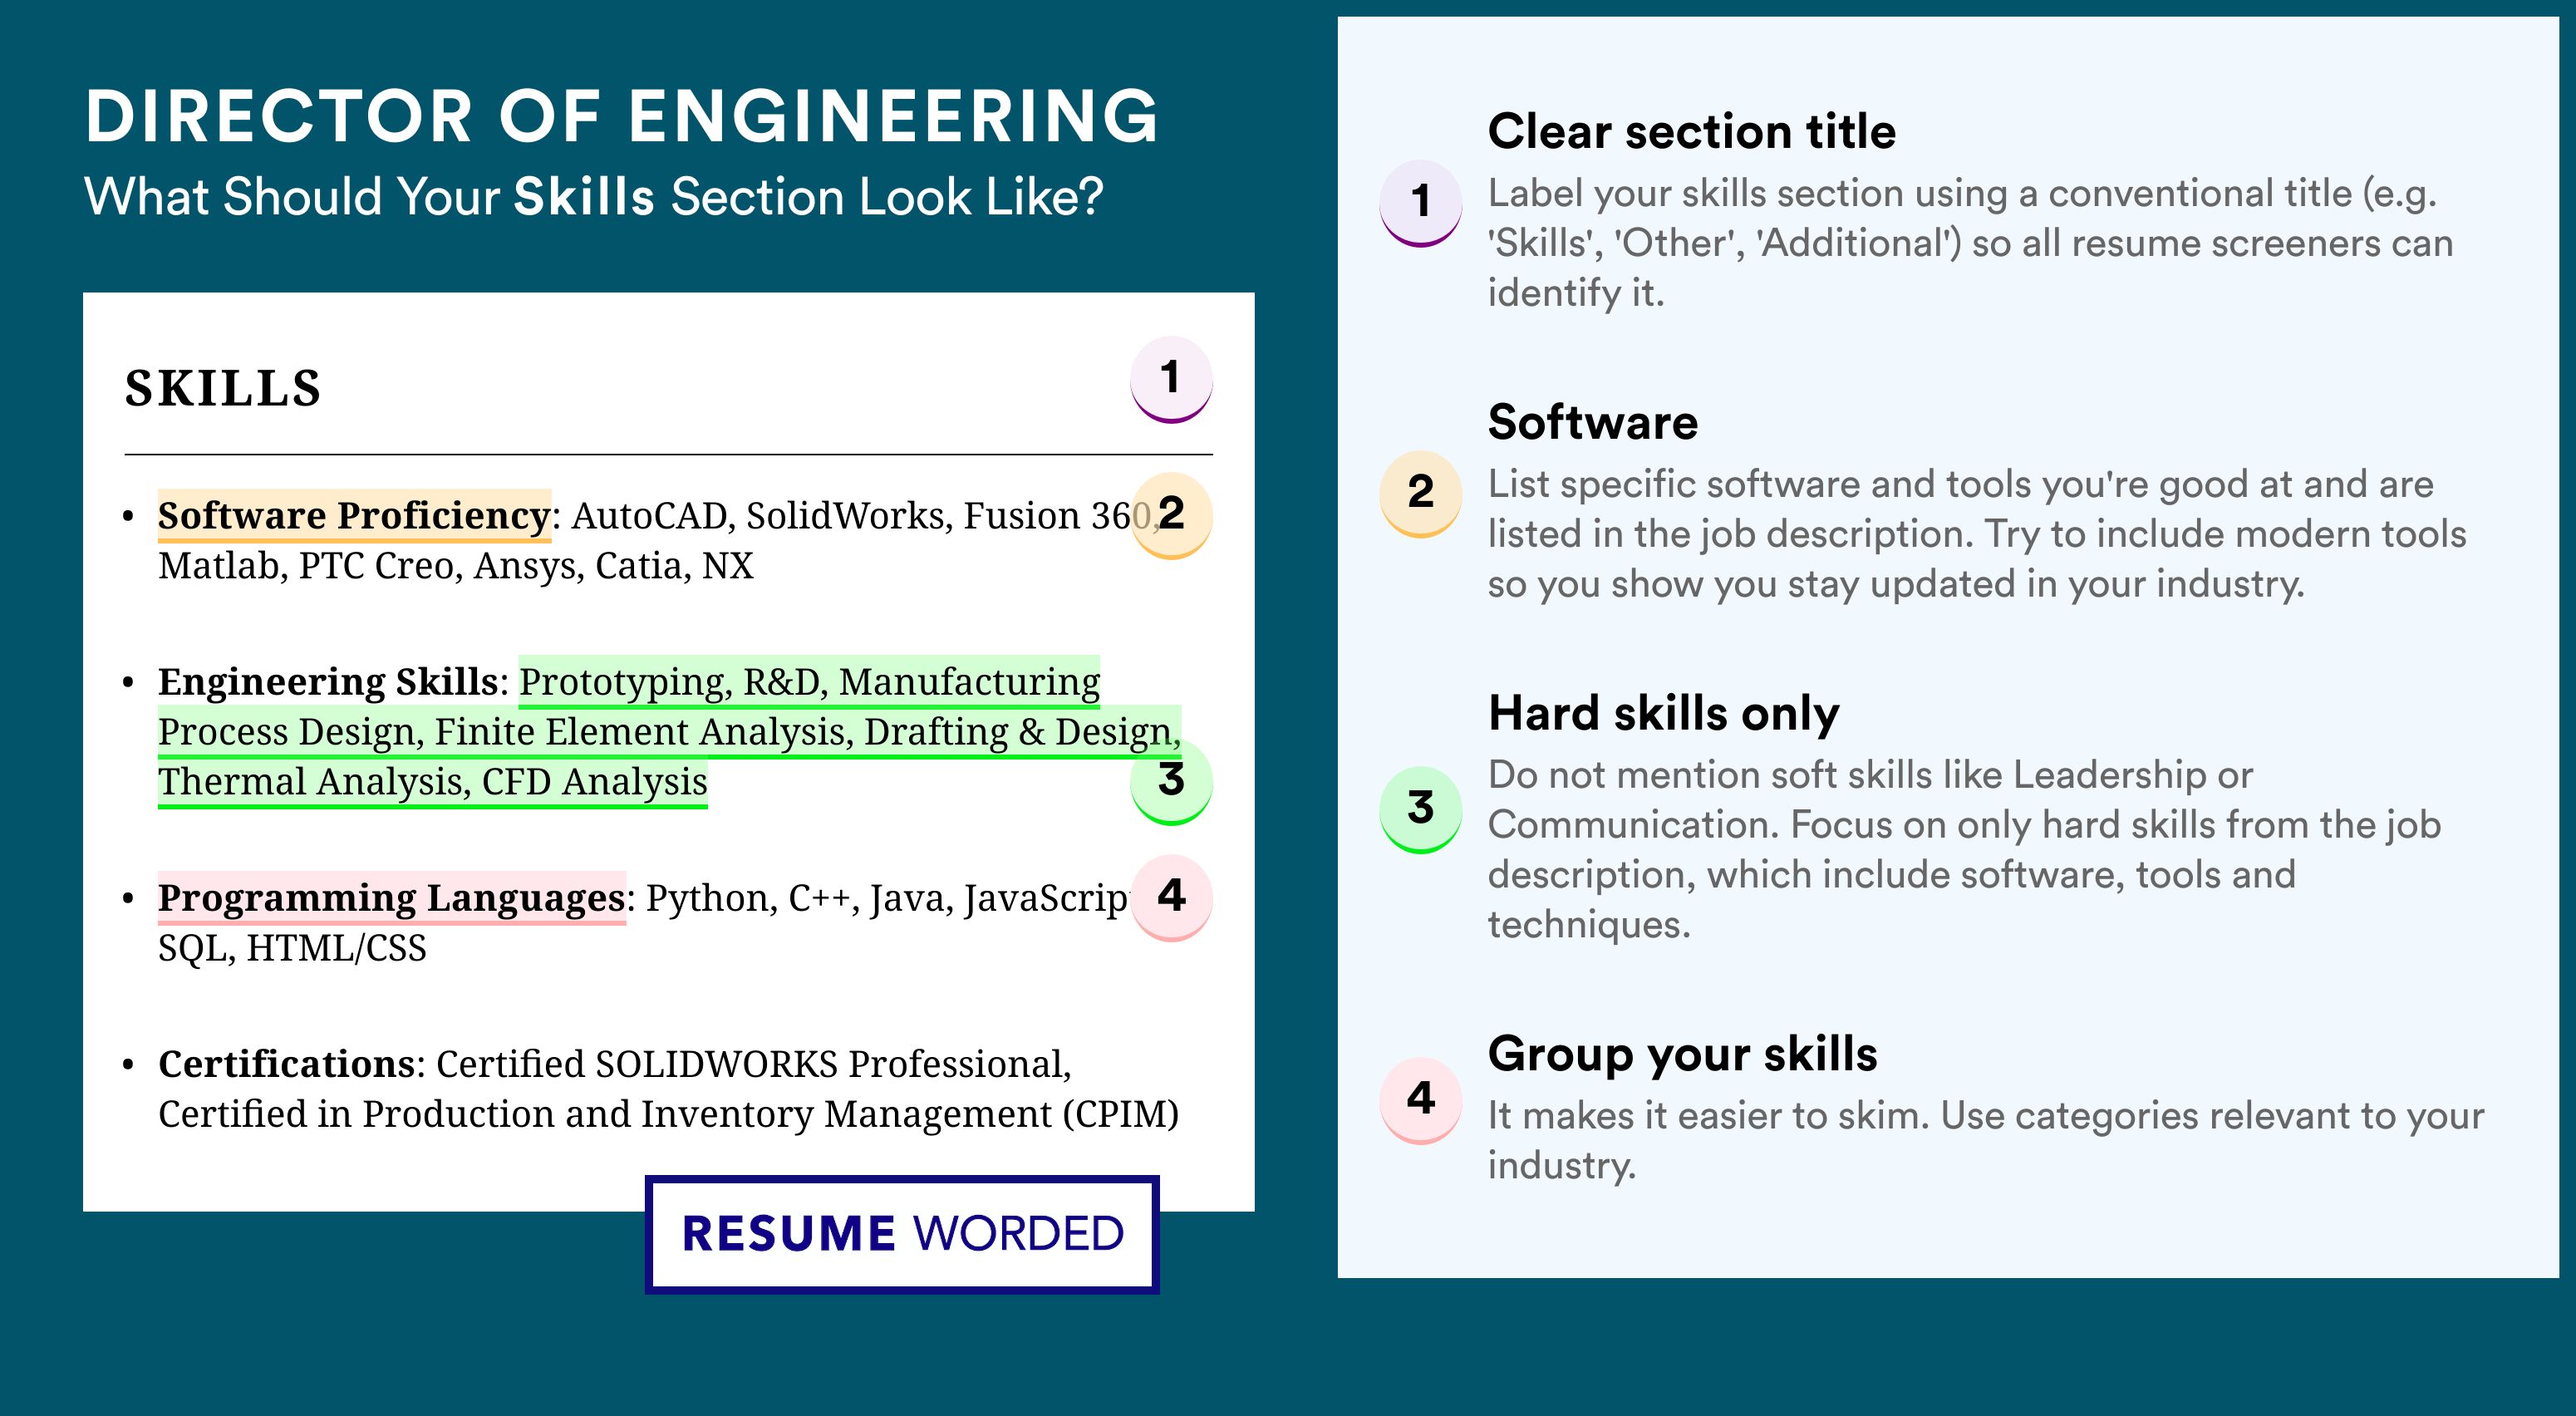 How To Write Your Skills Section - Director of Engineering Roles